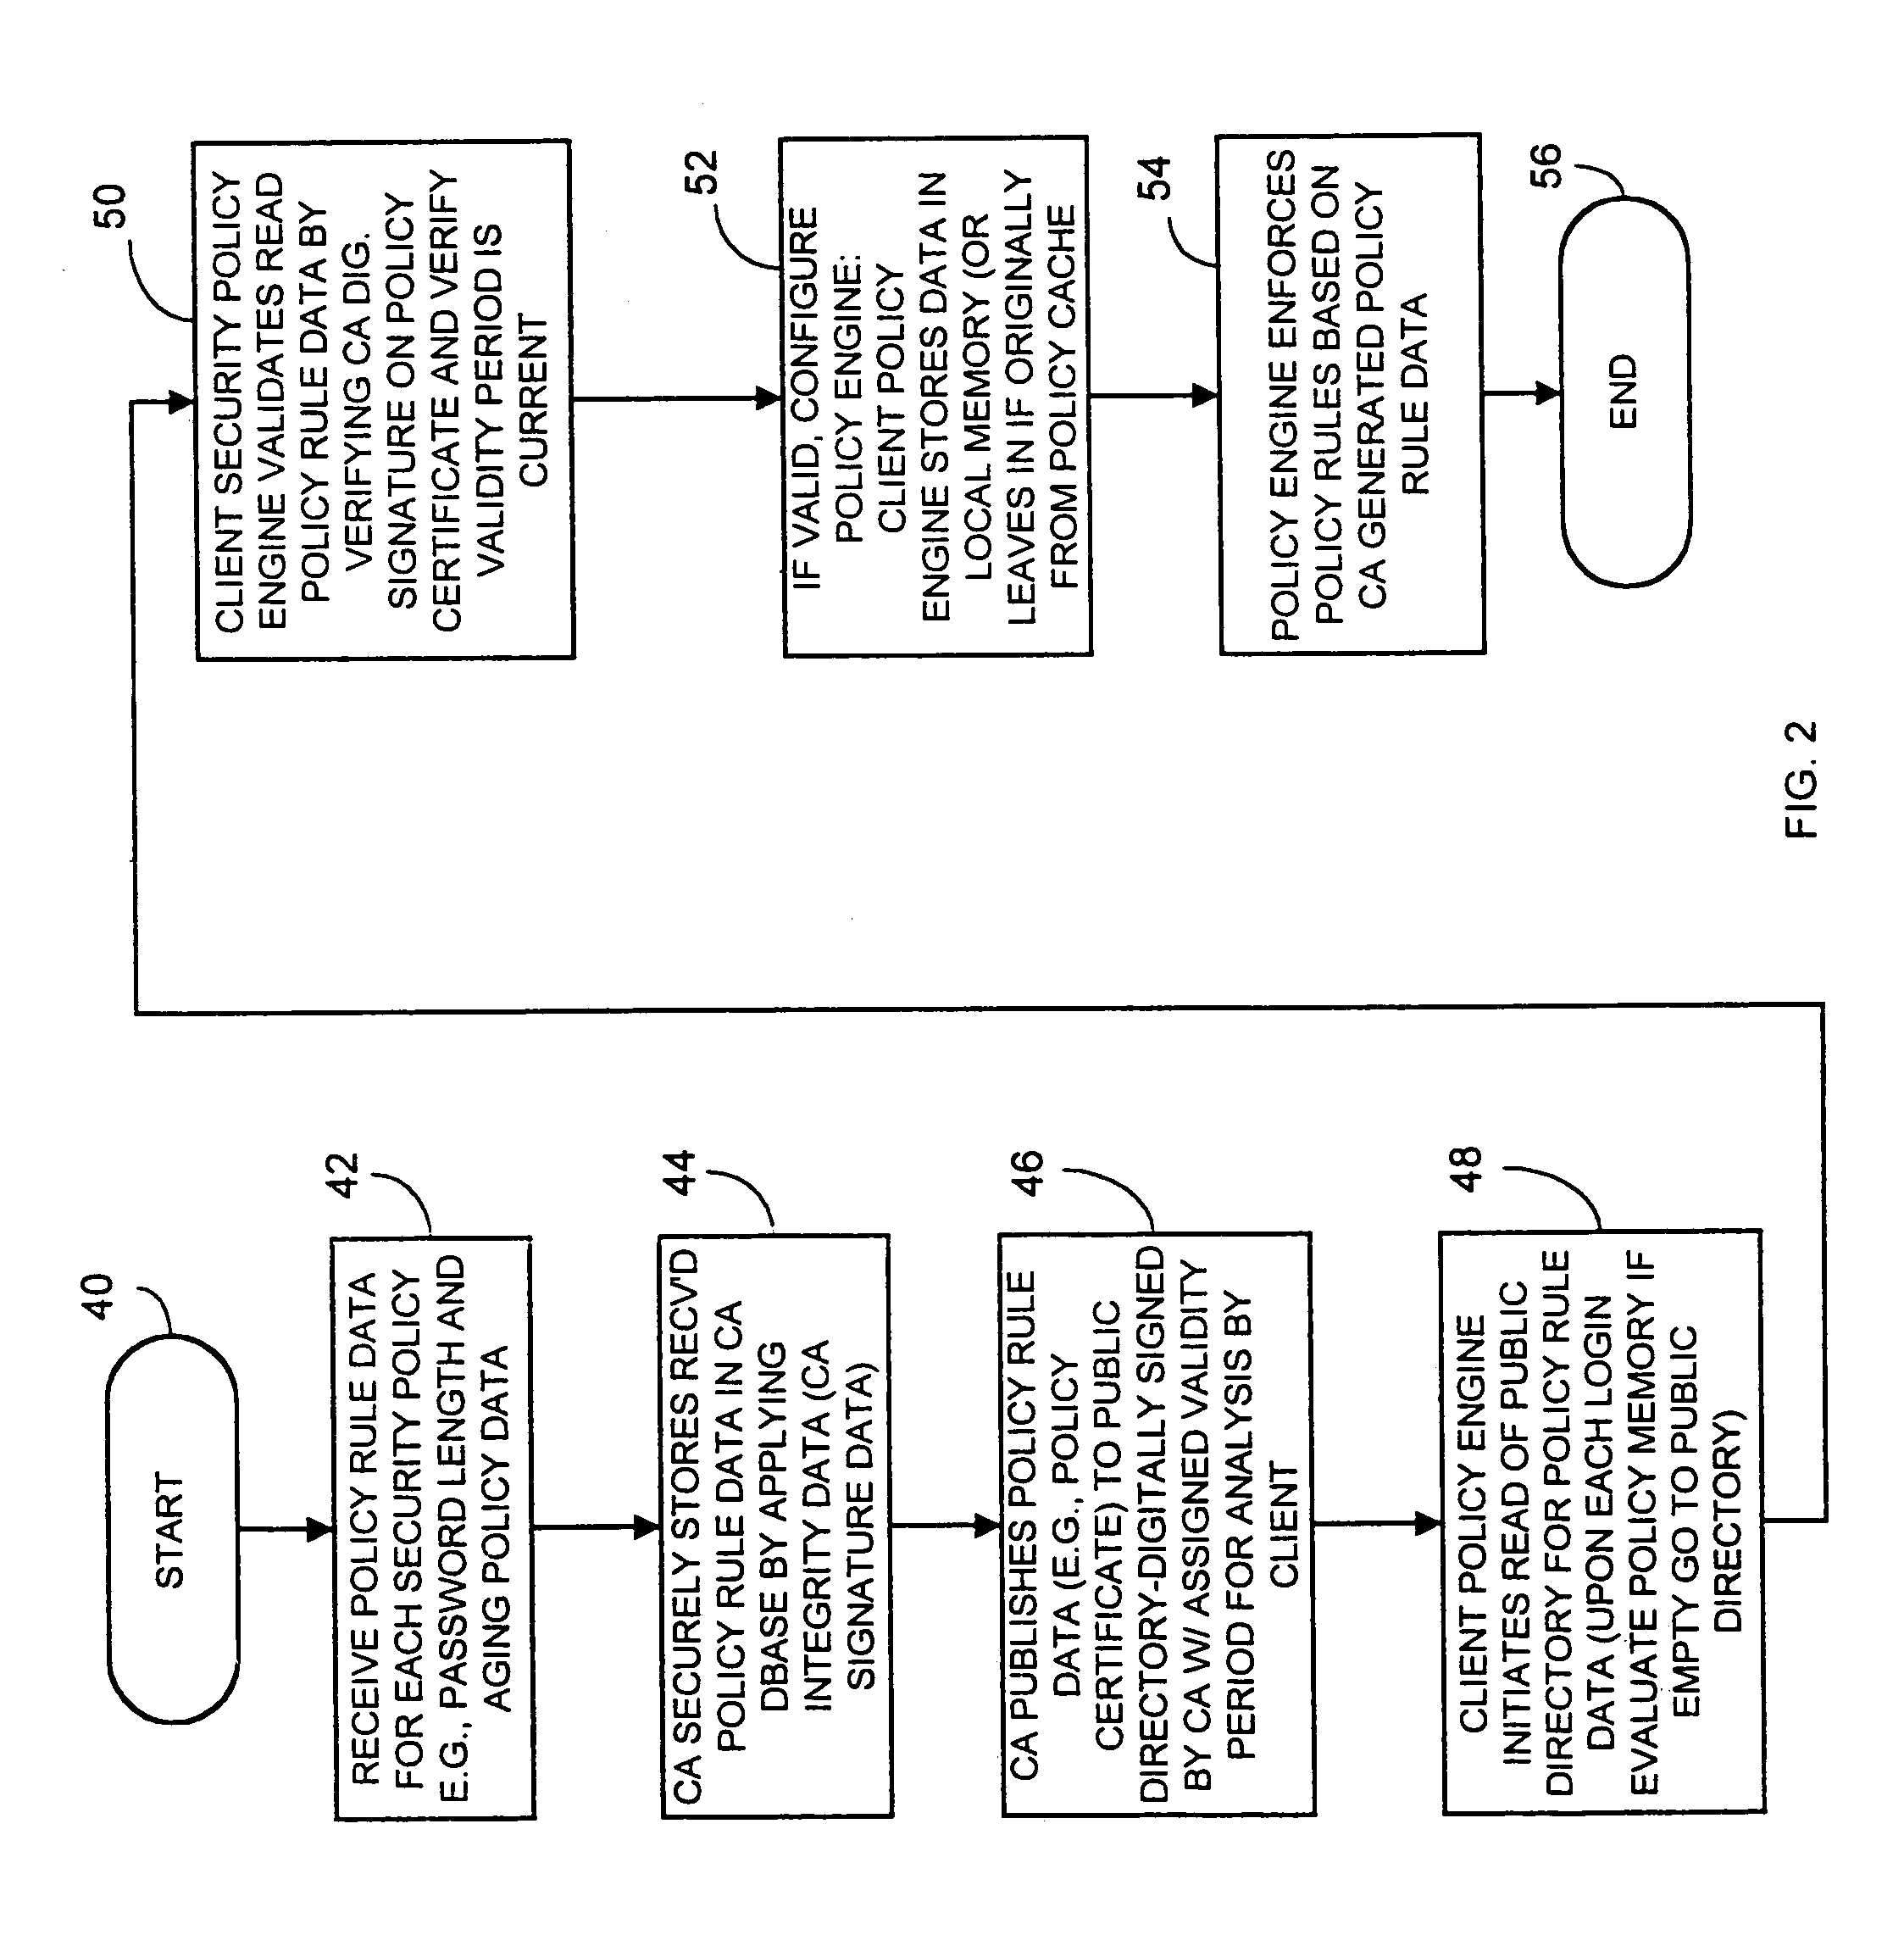 Computer network security system and method having unilateral enforceable security policy provision